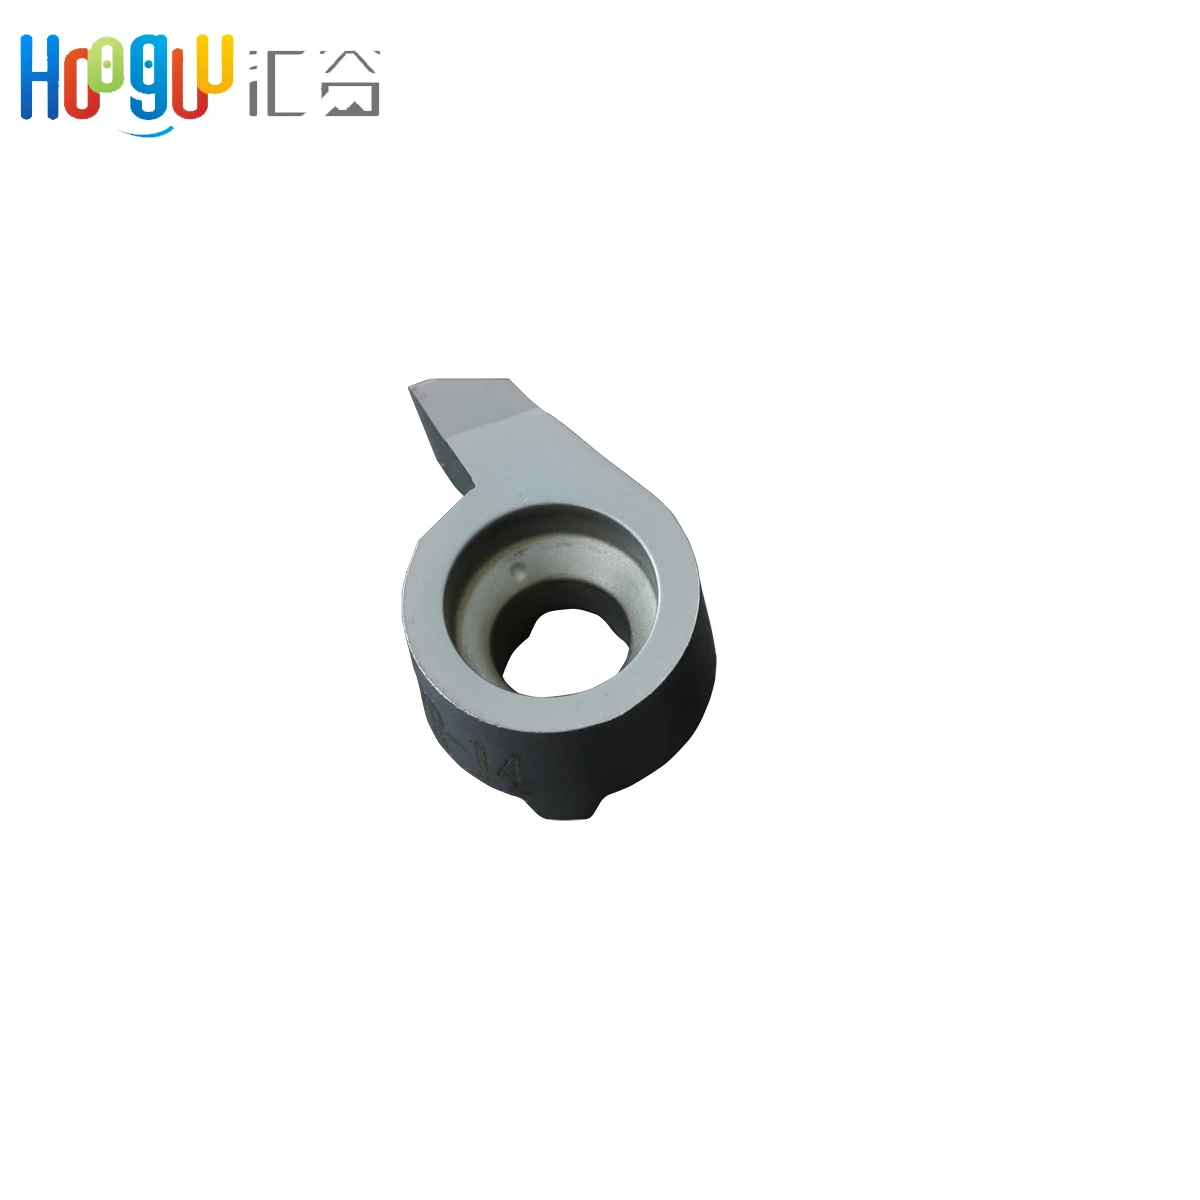 Grooving Tool MB 09PR Small Hole Deep Hole Cut Groove Comma Internal Holder Carbide Insert For High-quality CNC Lathe Groove